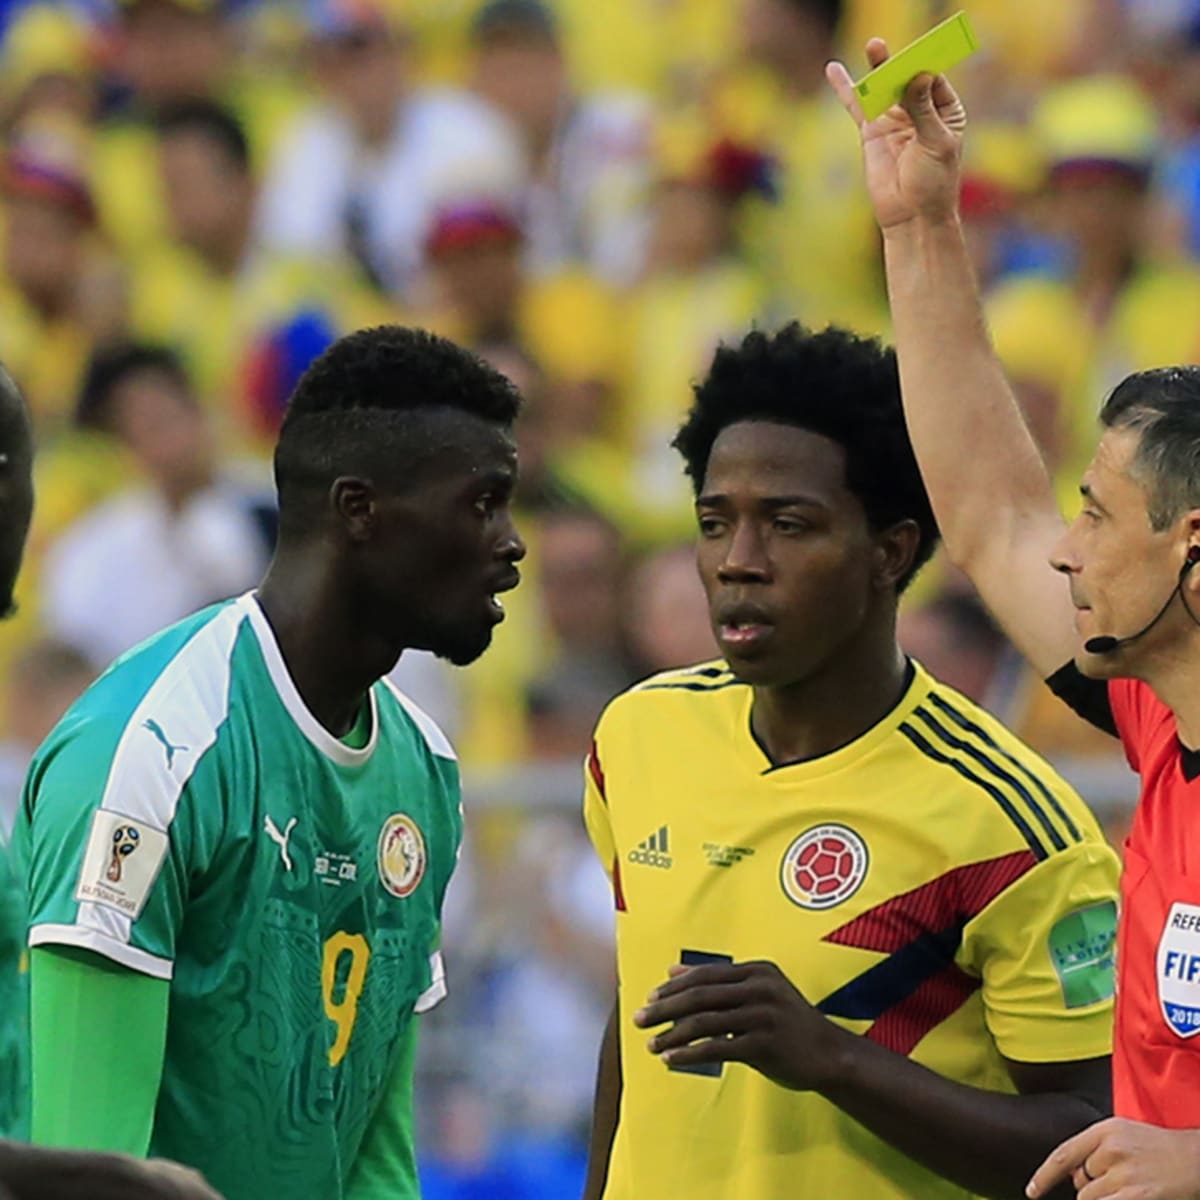 Everything You Need to Know About the World Cup 'Fair Play' Tiebreaker